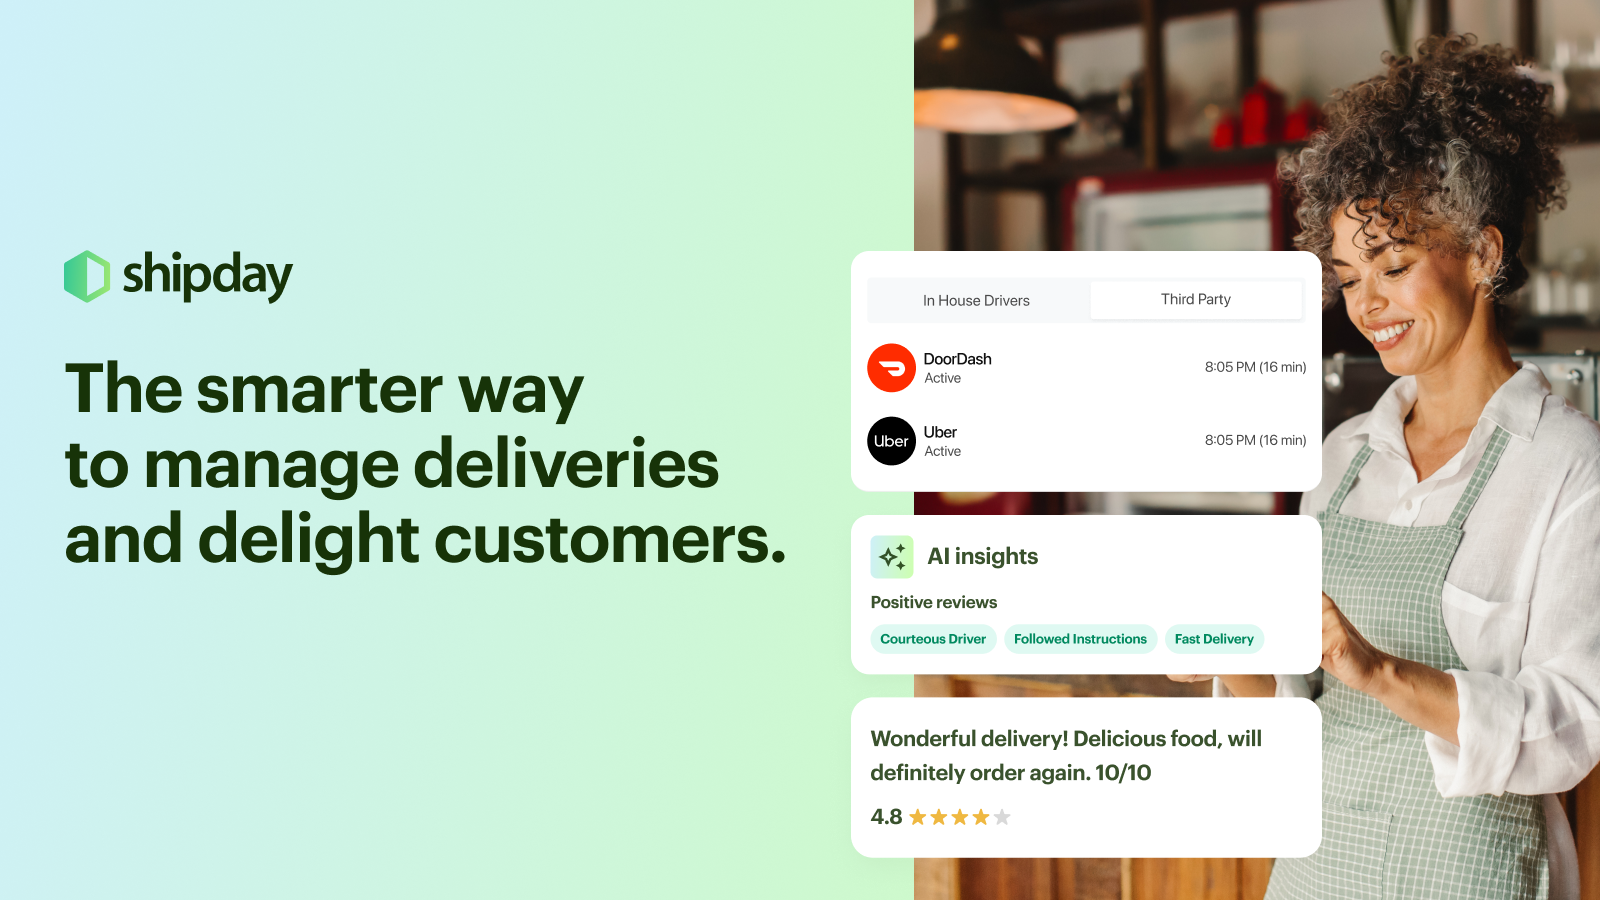 See all your orders in a single dashboard.